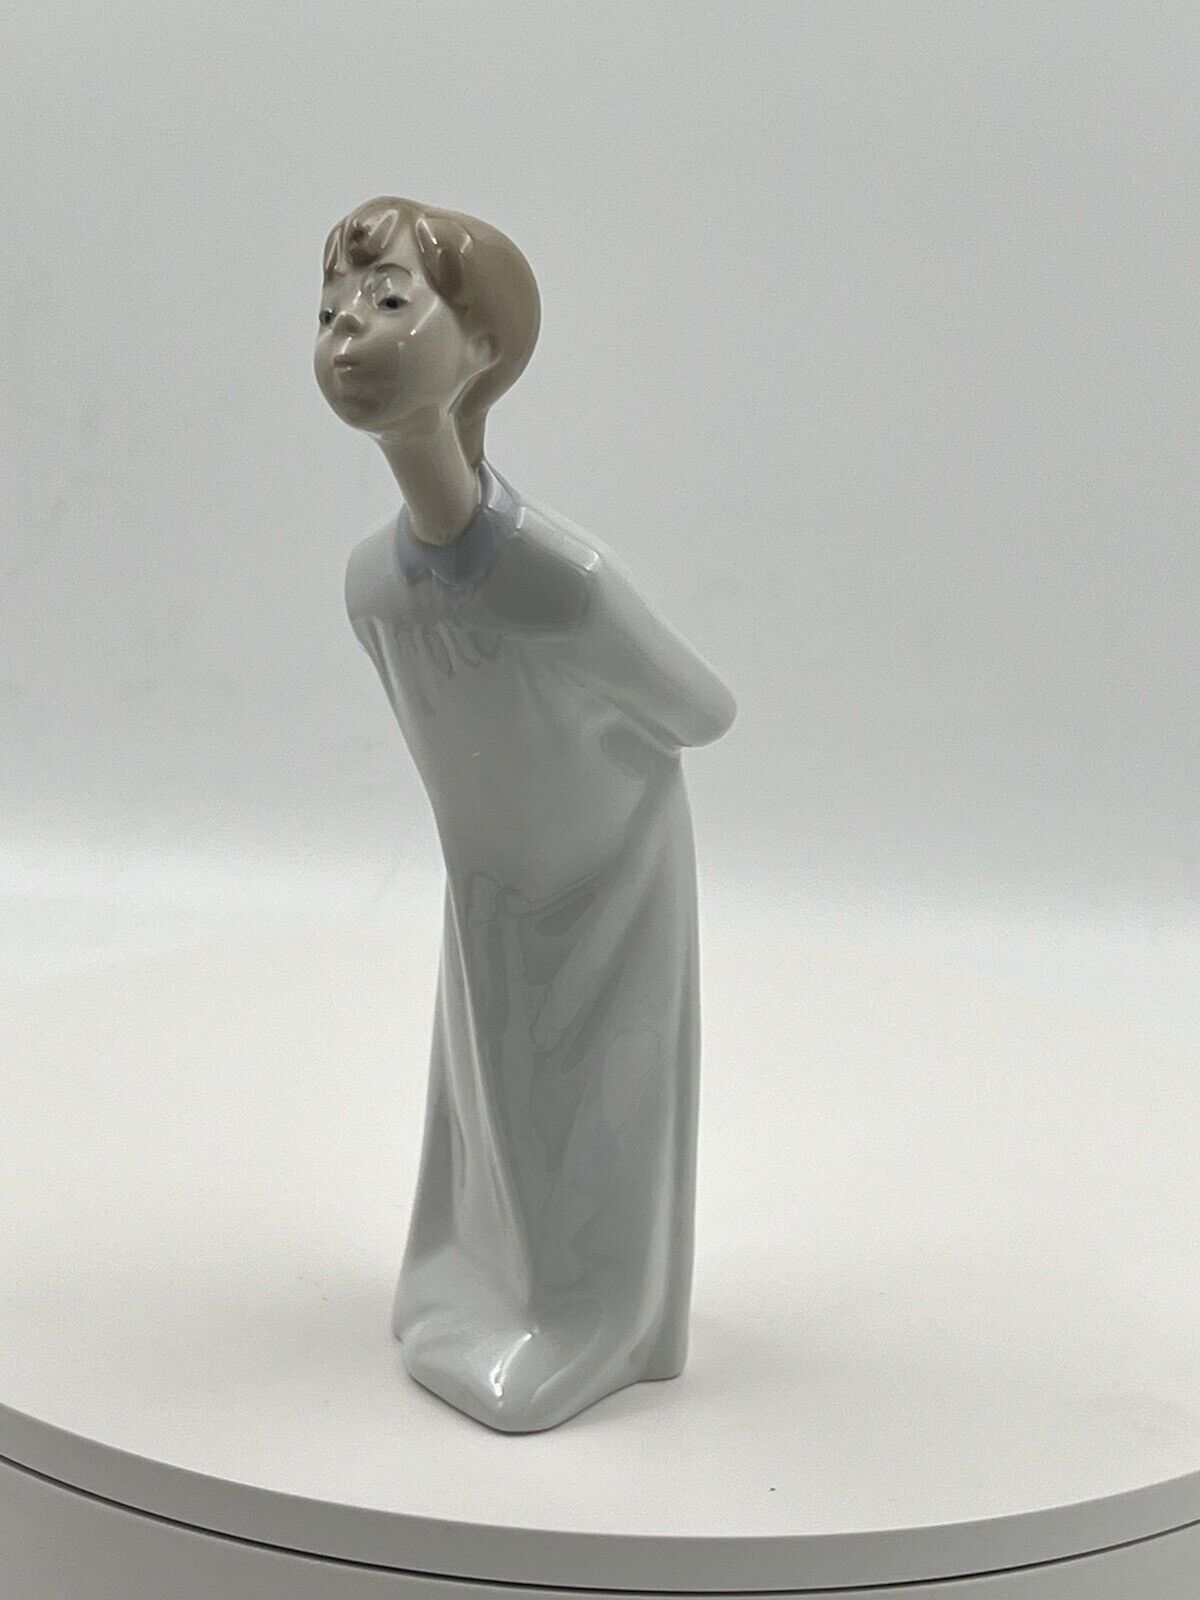 VINTAGE NAO BY LLADRO BLOWING KISS BOY FIGURINE 4869 PORCELAIN